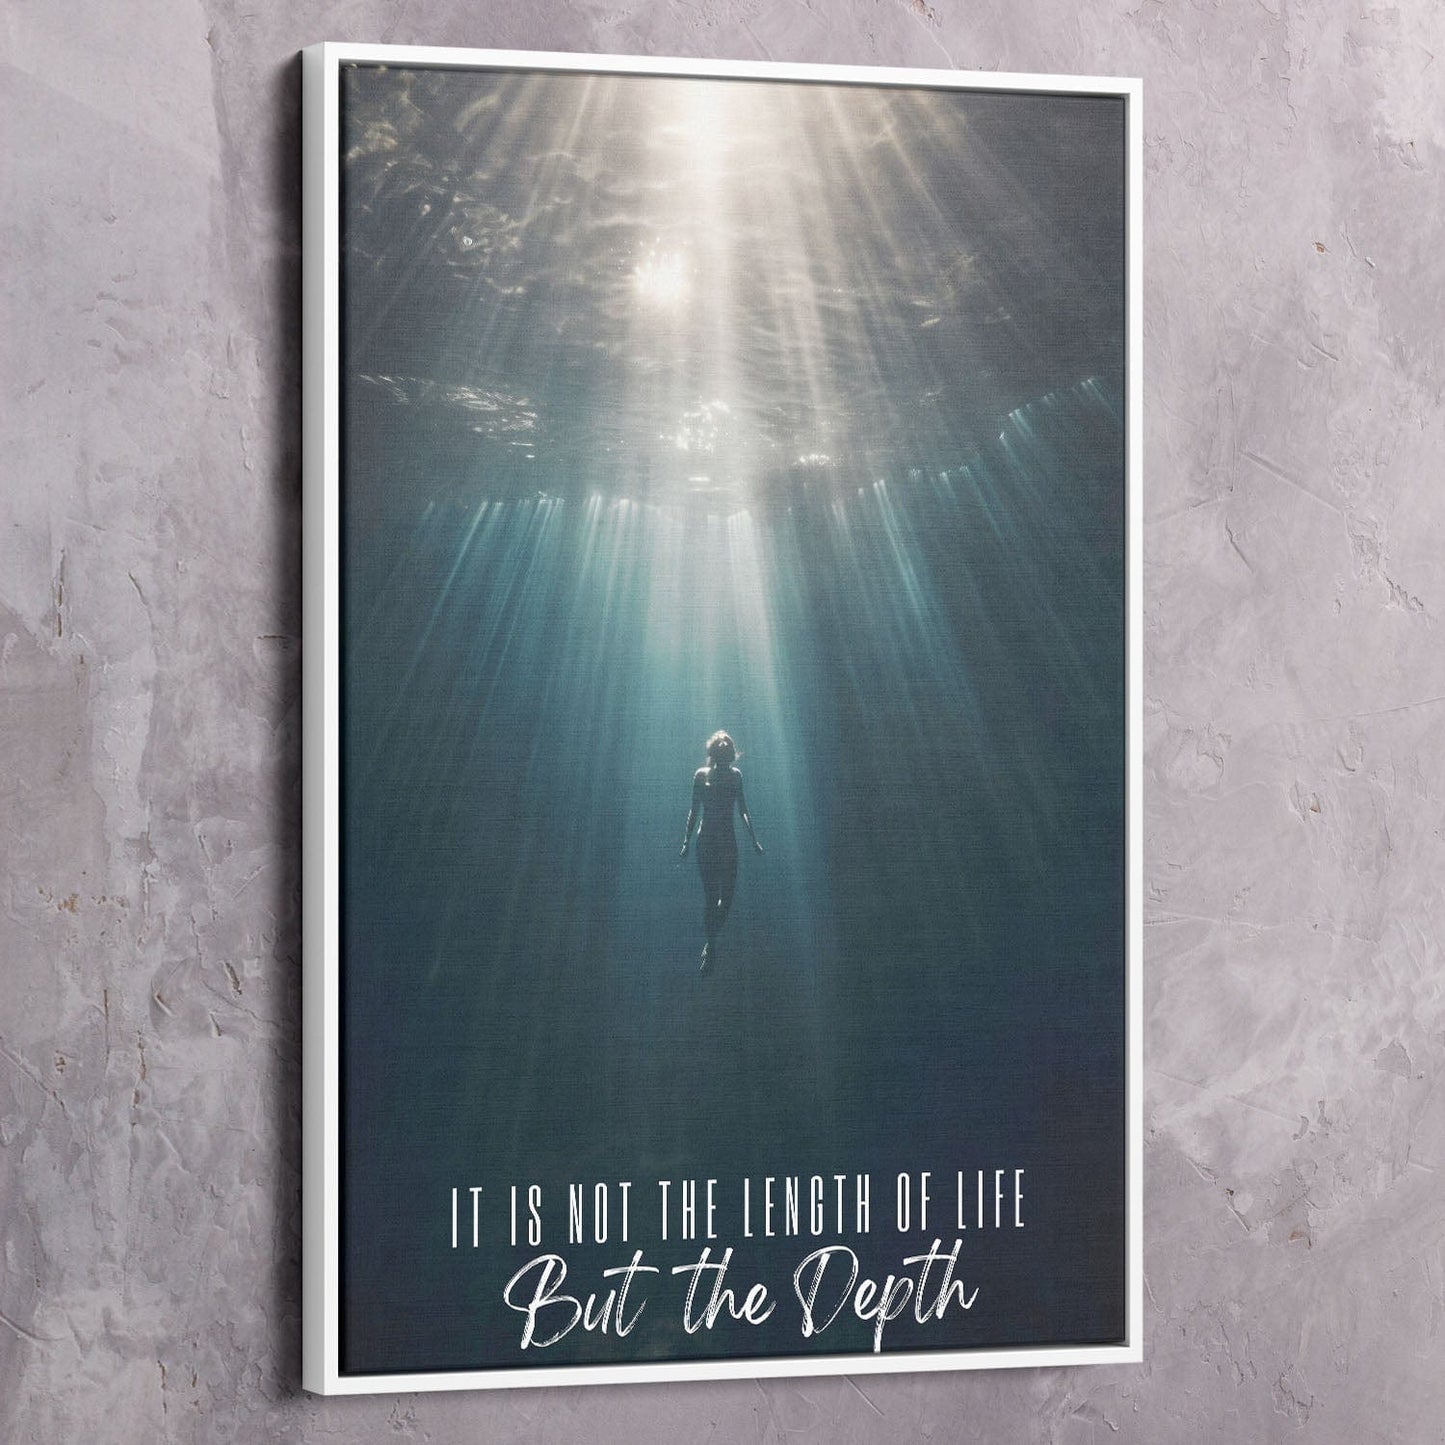 Underwater - It is not the length of life but the depth - Ralph Waldo Emerson Quote Wall Art | Inspirational Wall Art Motivational Wall Art Quotes Office Art | ImpaktMaker Exclusive Canvas Art Portrait